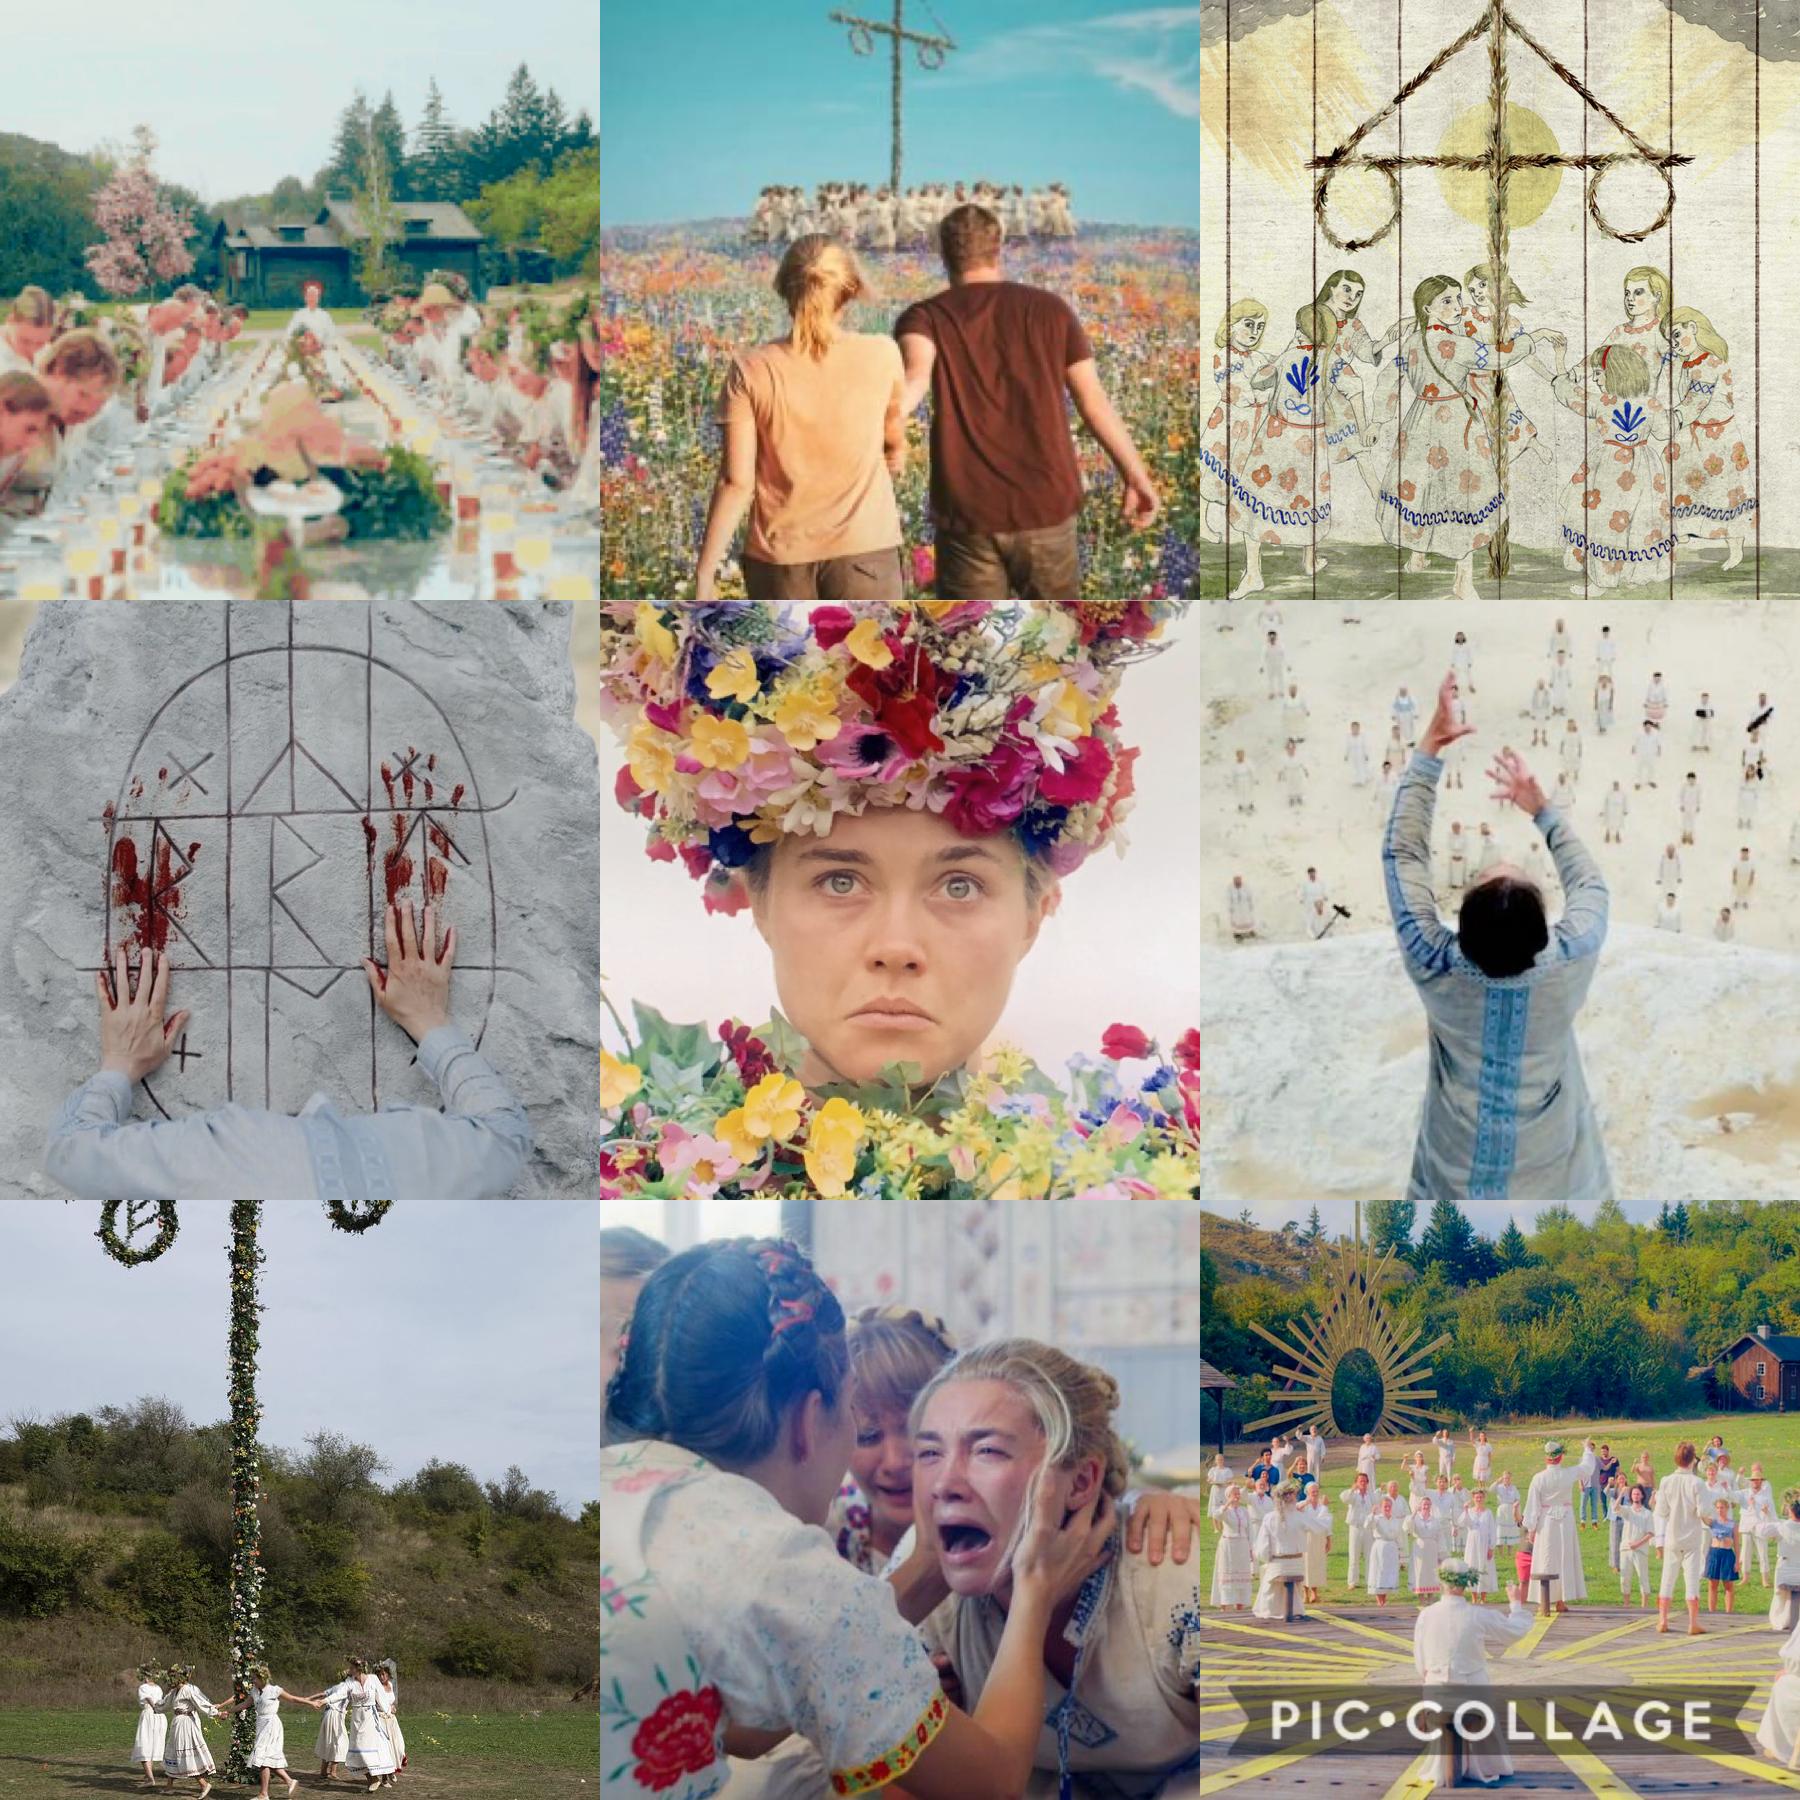 mood board #4, midsommar 
i’m so obsessed with this film omg, so beautifully distressing